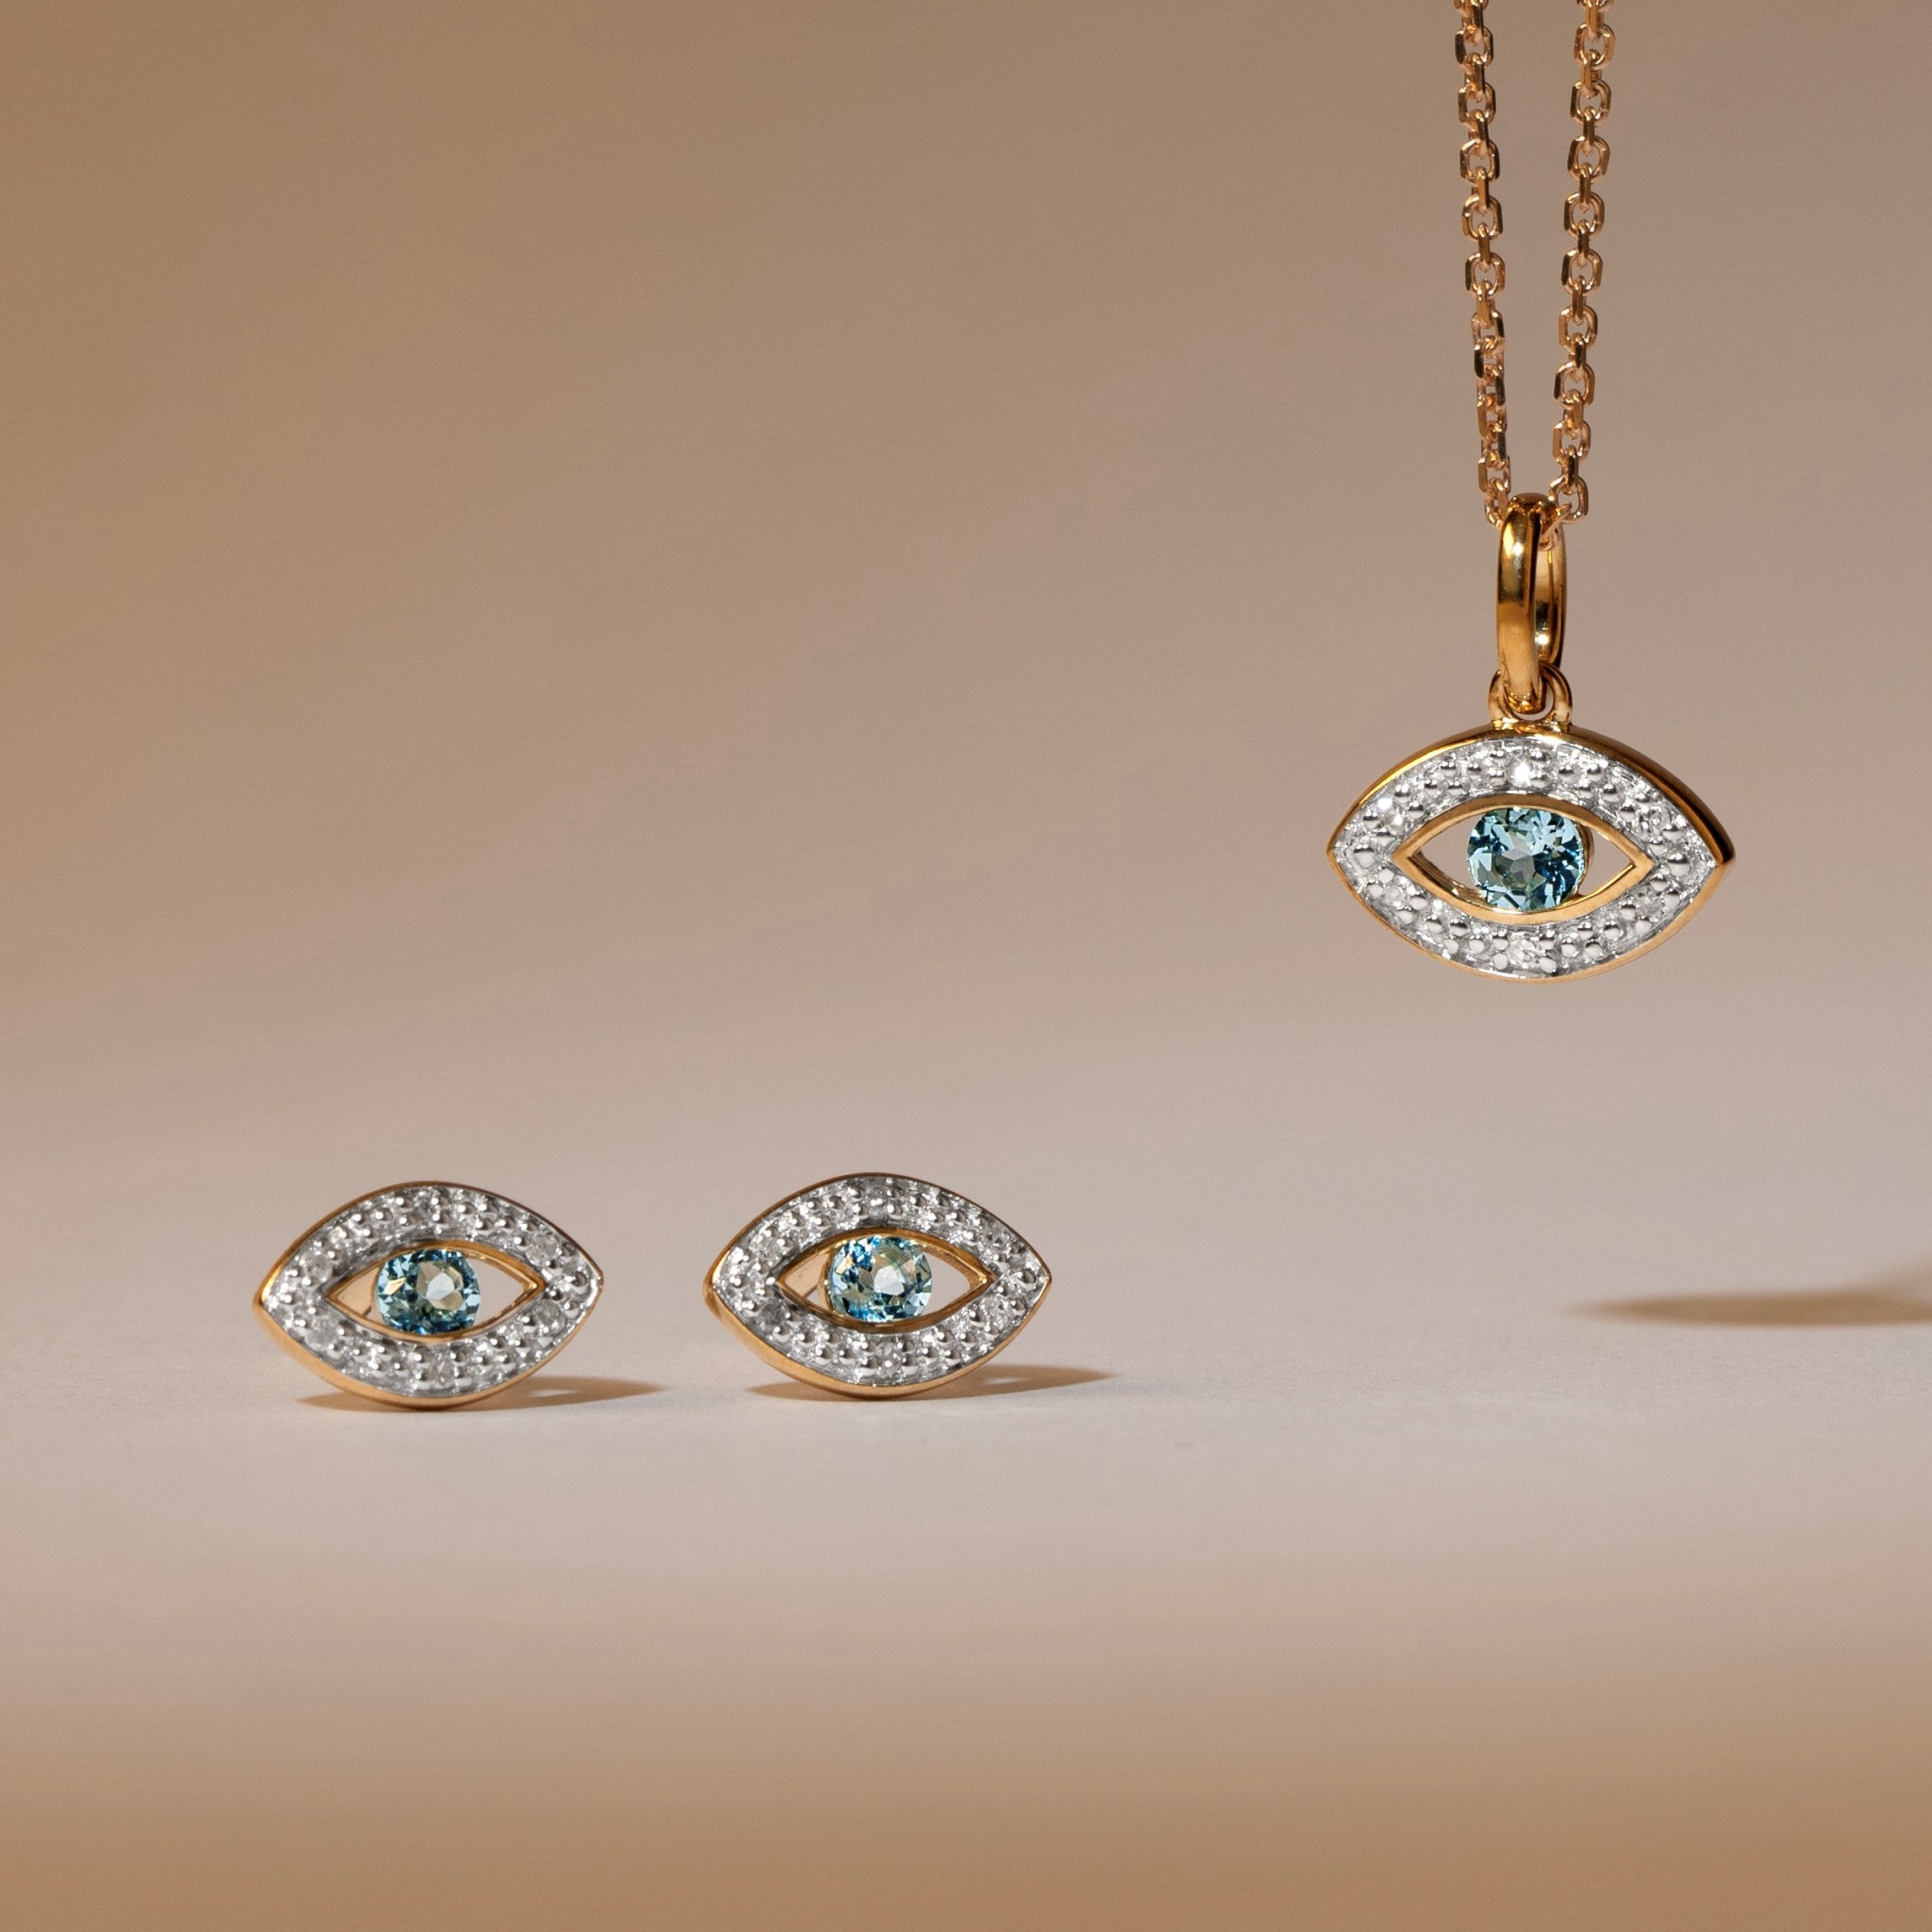 Evil Eye Jewellery Stud Earrings and Necklace with diamonds